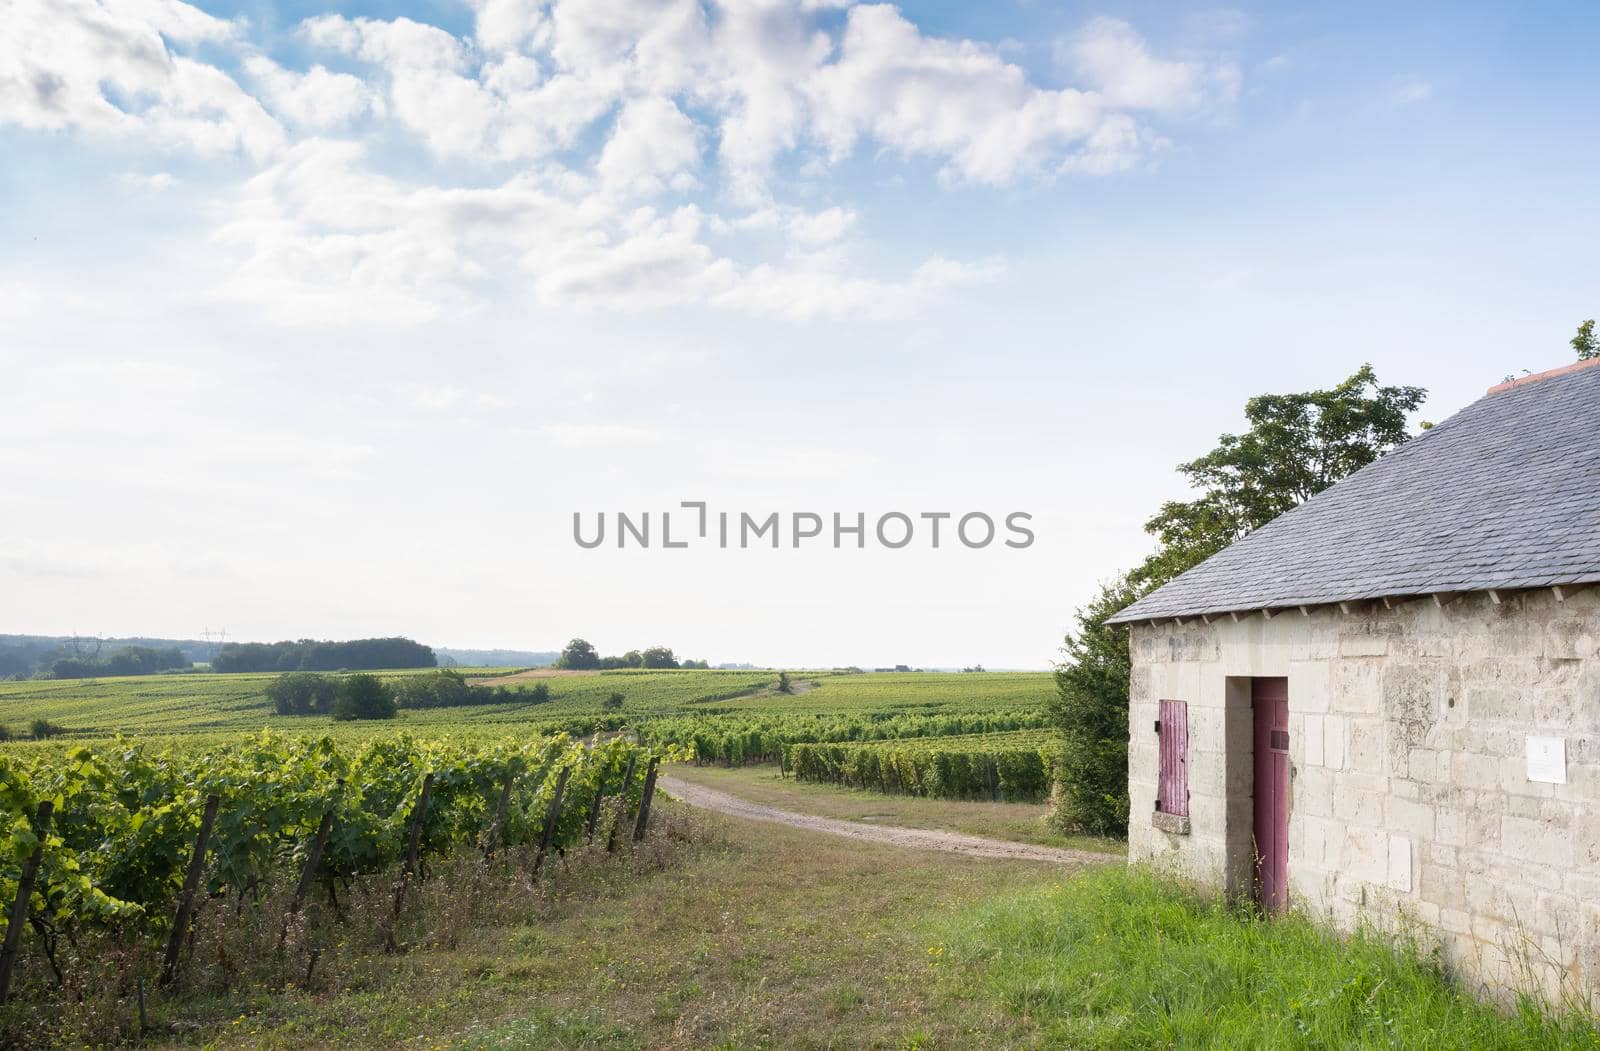 vineyards and old stone walls in Parc naturel regional Loire-Anjou-Touraine near river loire in france by ahavelaar